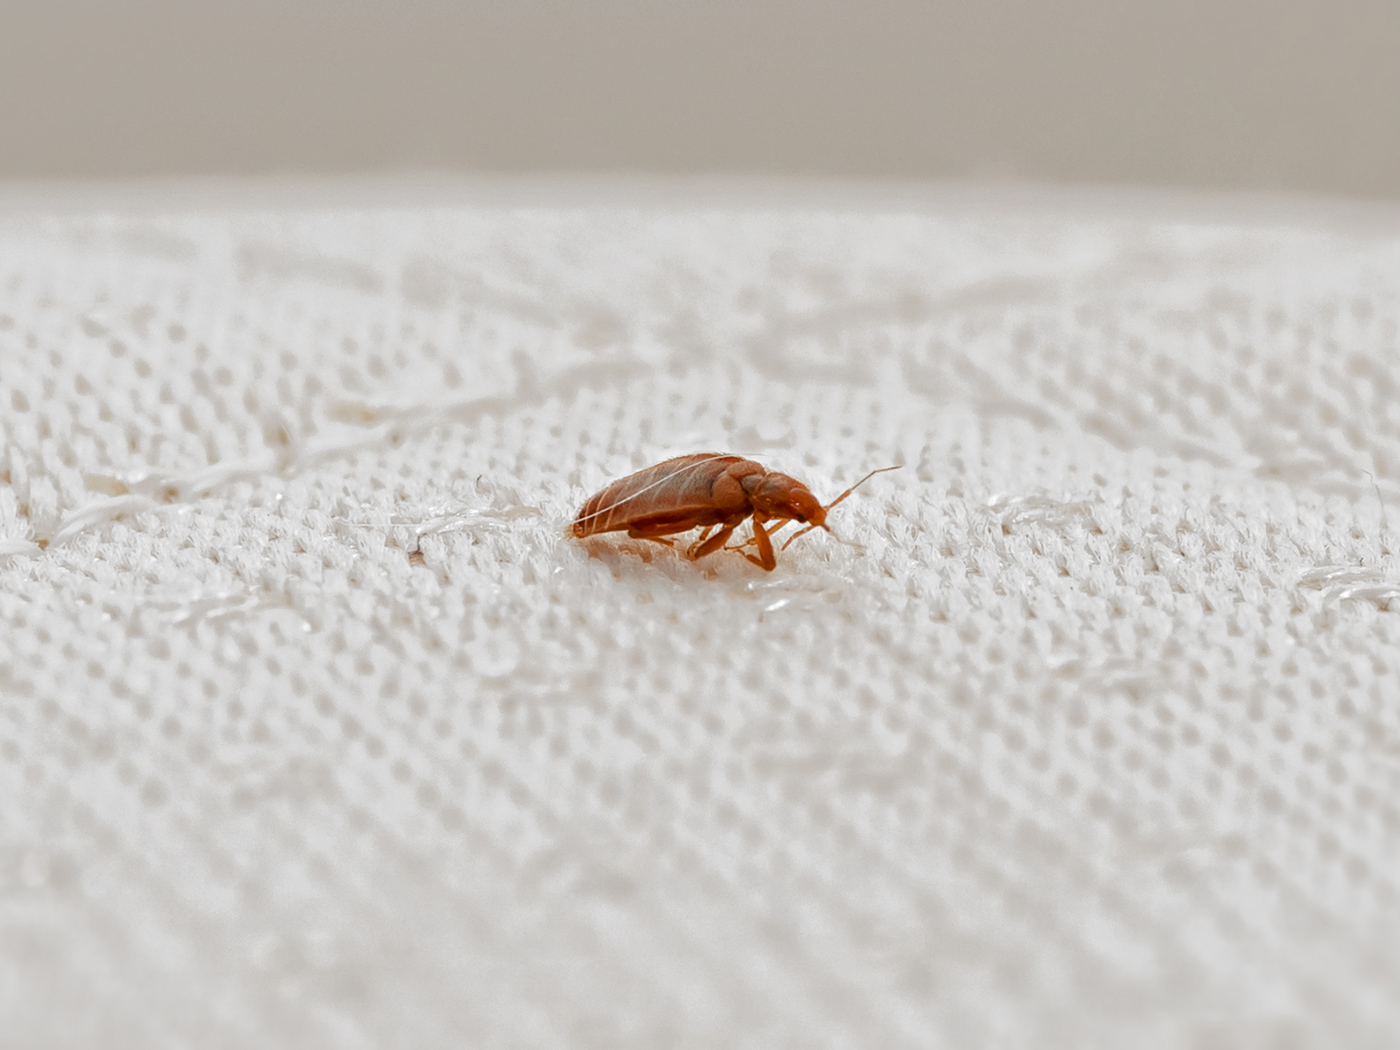 Small bed bugs – a major issue for any type of accommodation